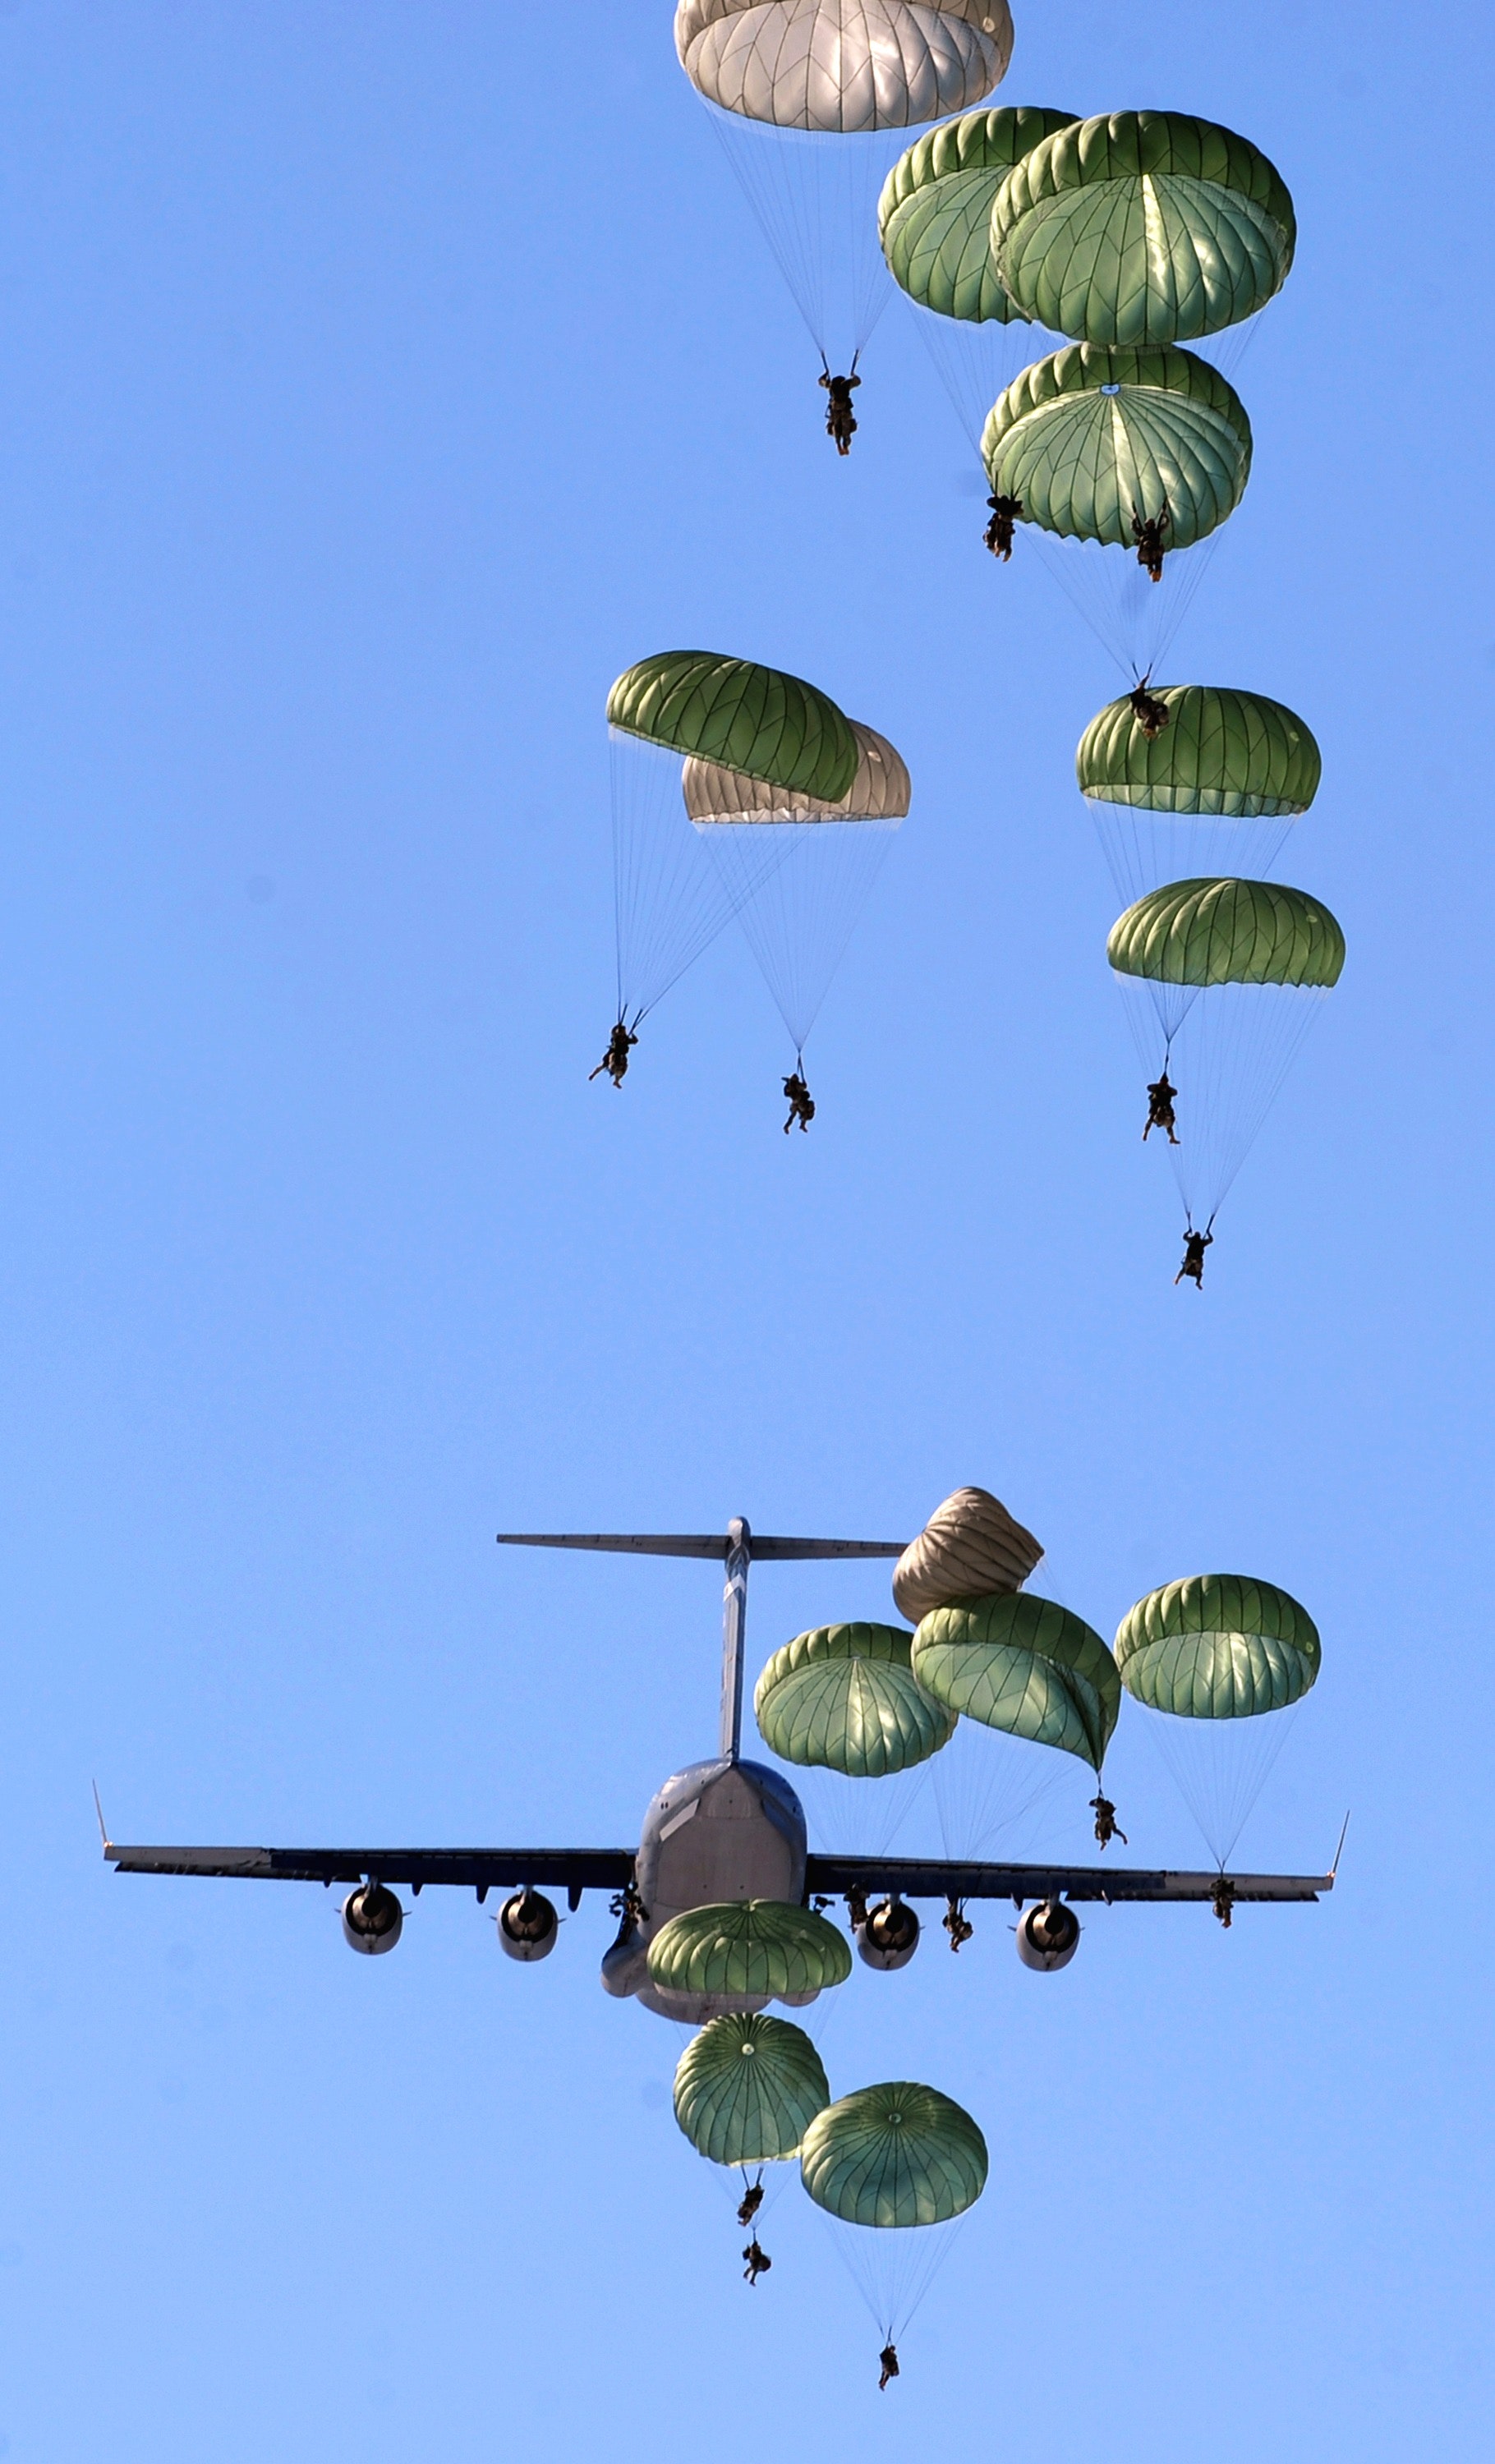 Army Paratroopers Practicing Parachute Drop from a Military Air ...